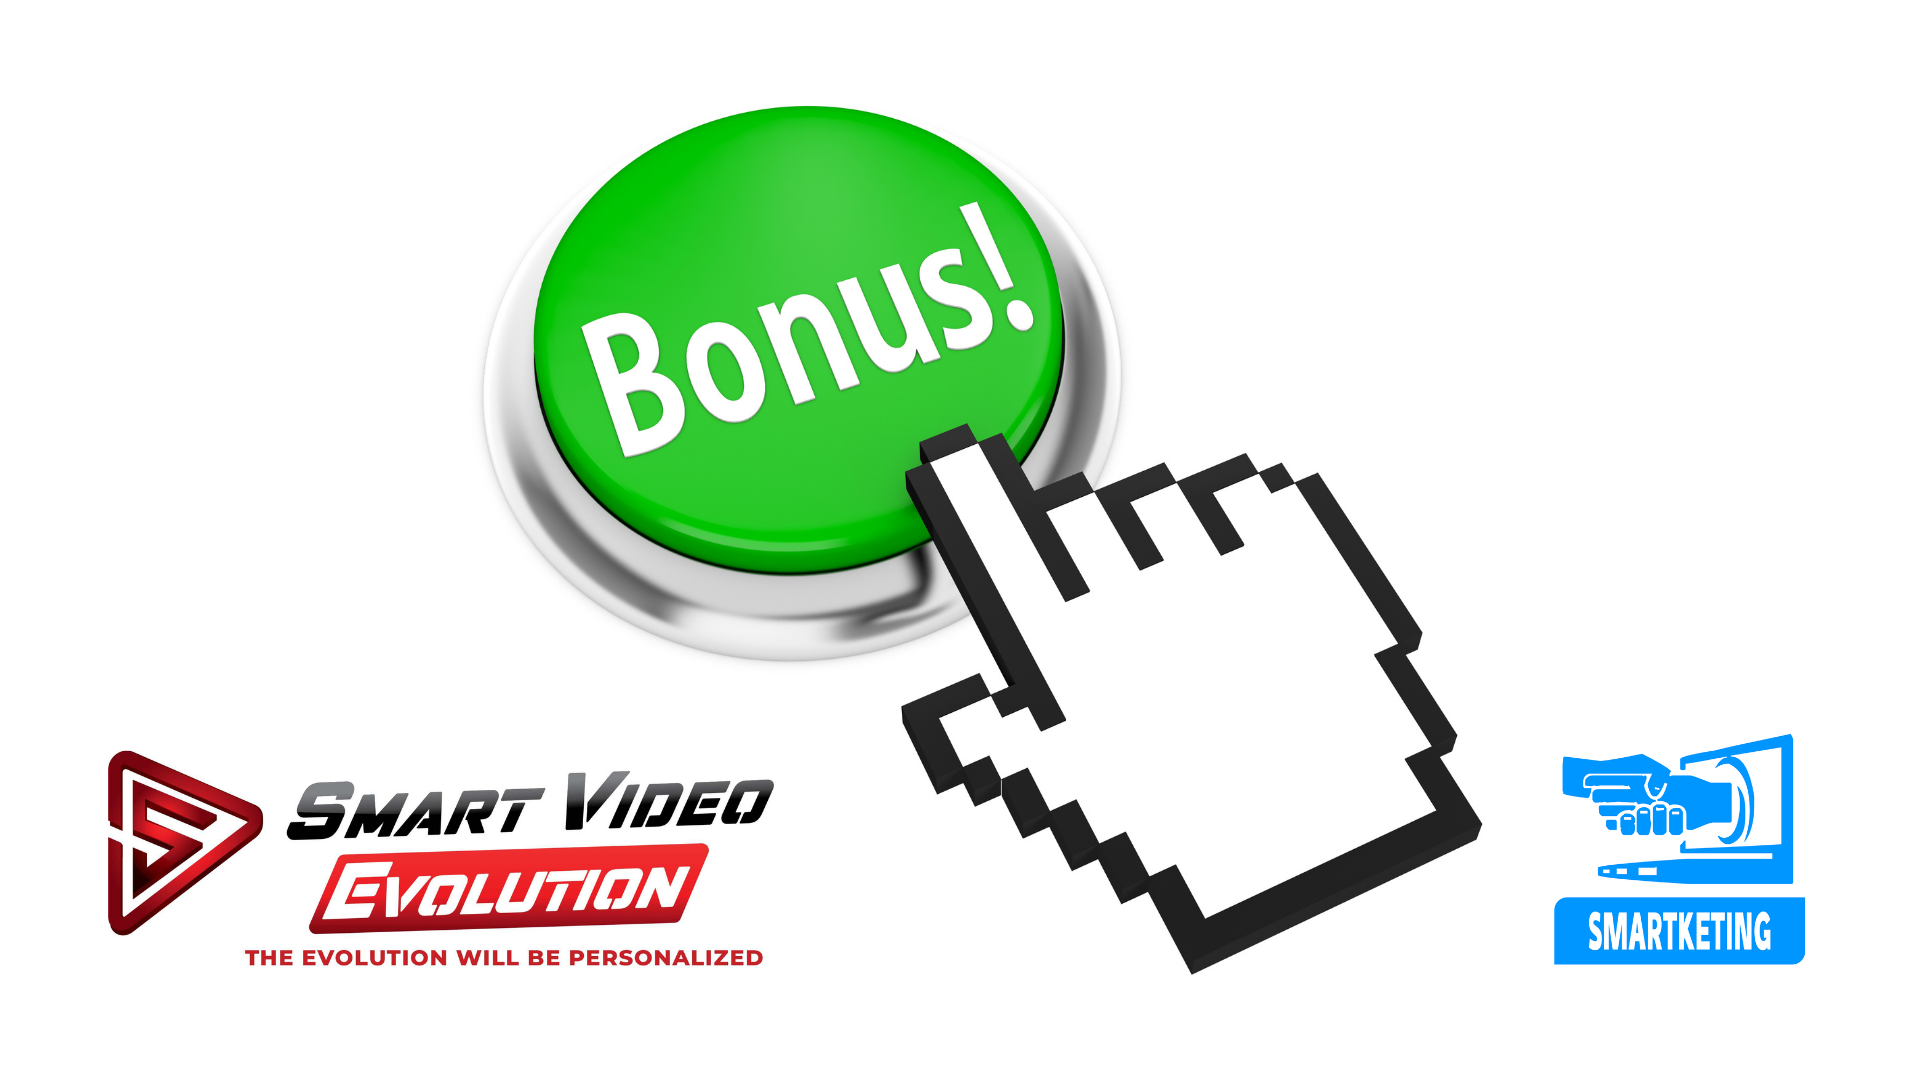 Click on this link to get SmartVideo and Bonuses!